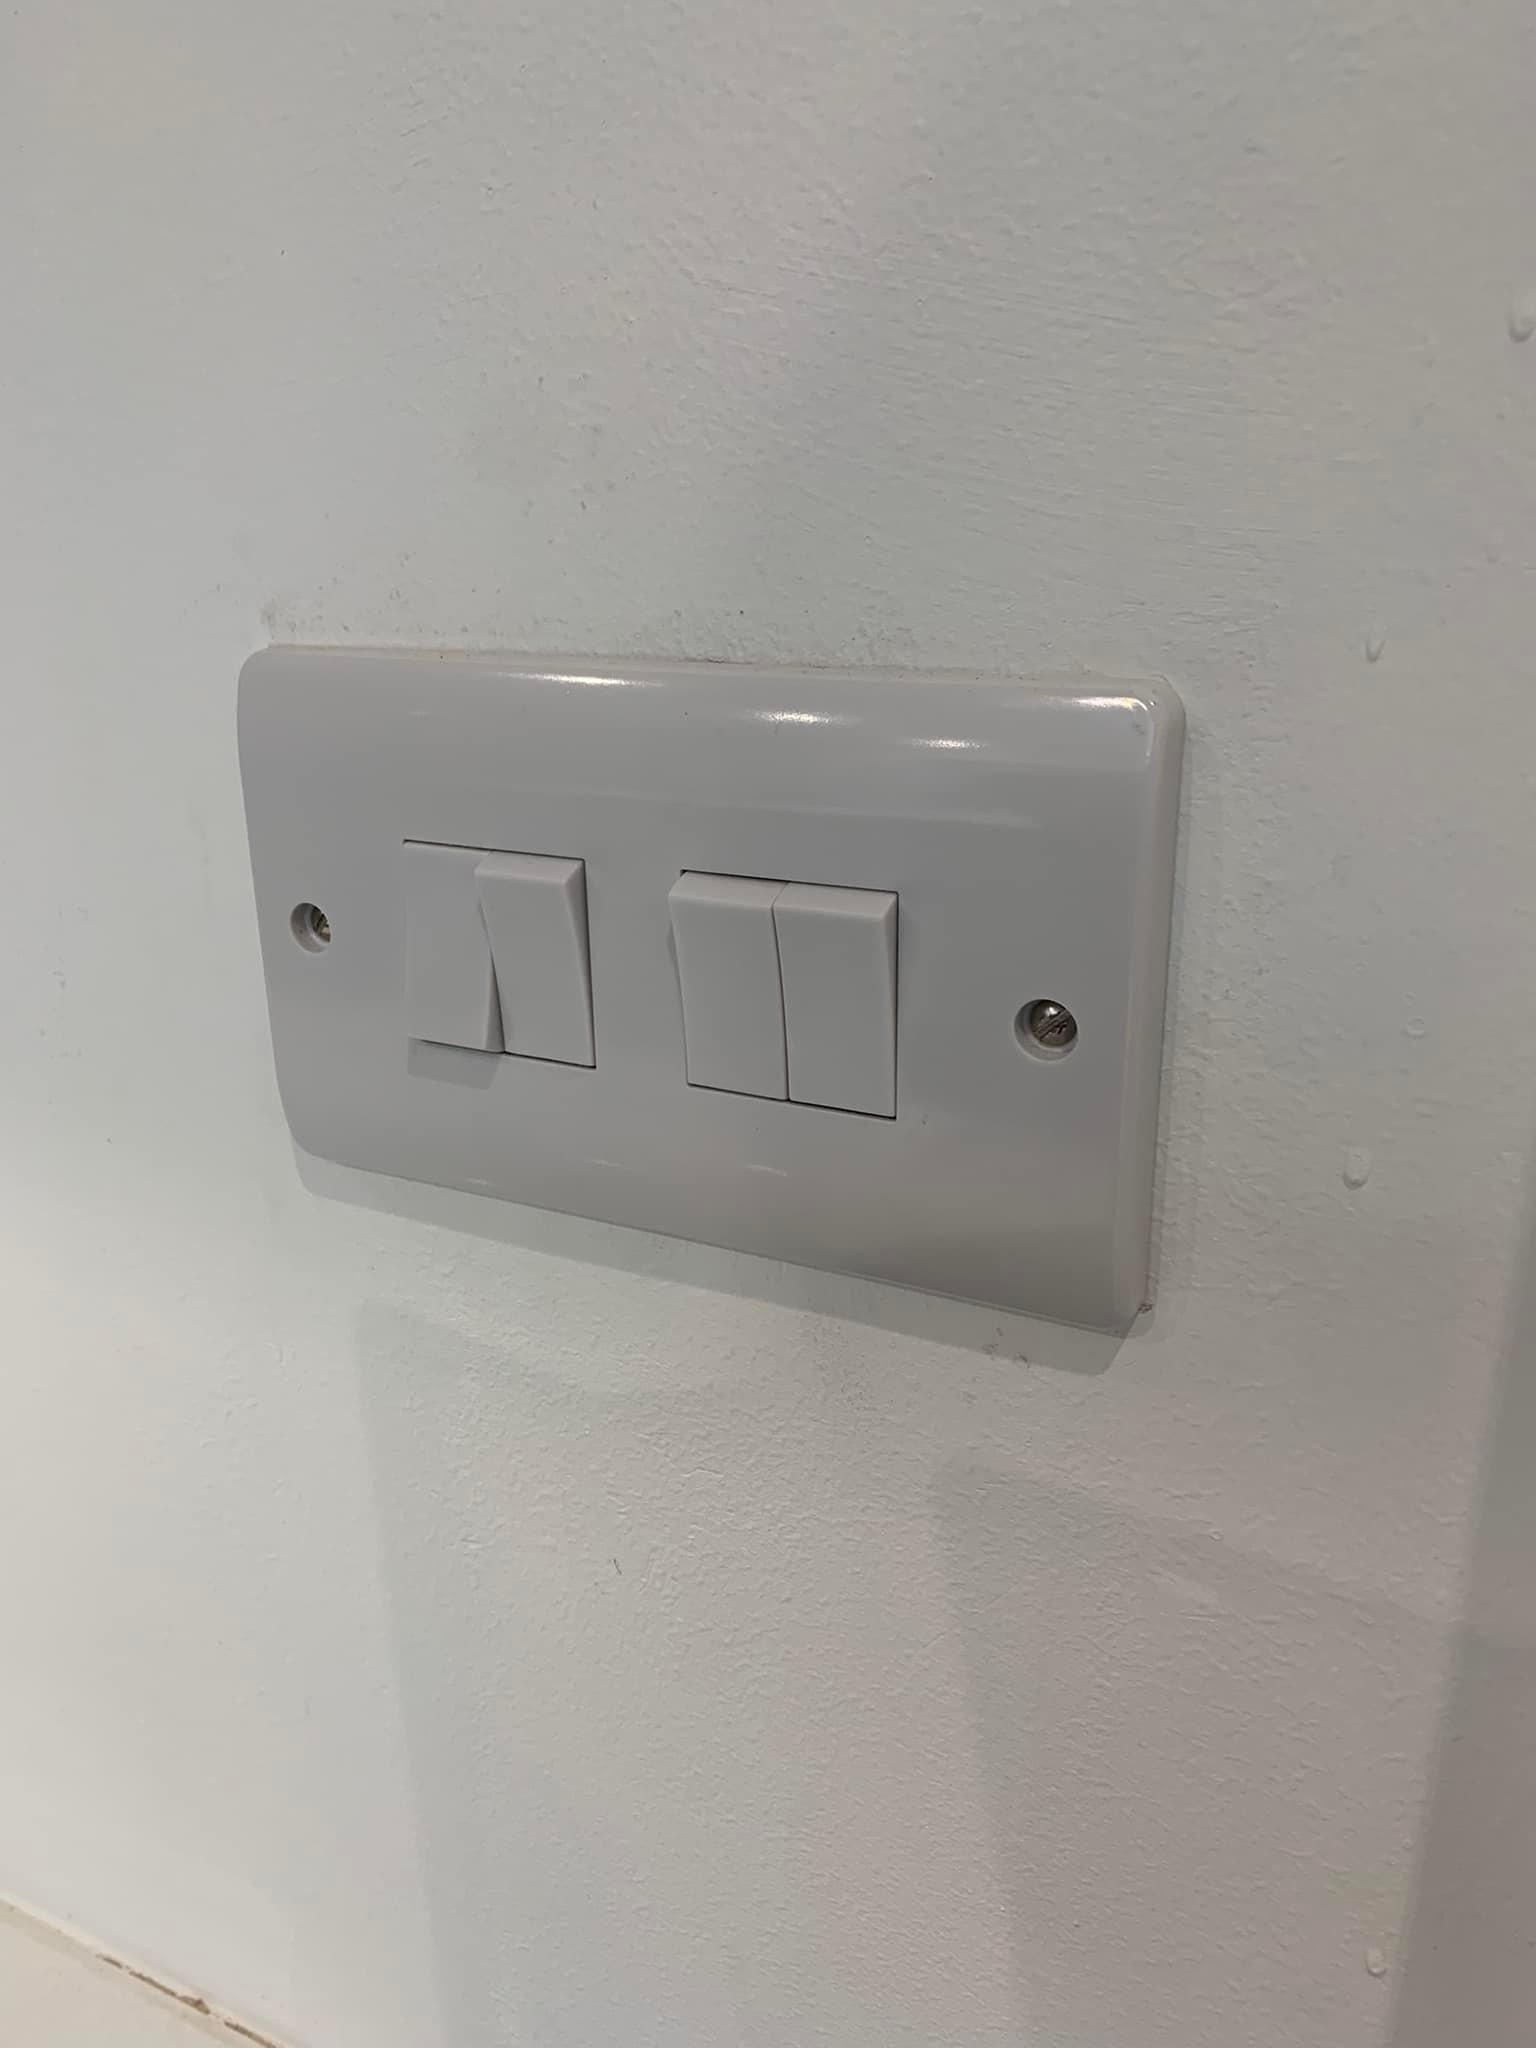 Lightswitches on kitchen wall